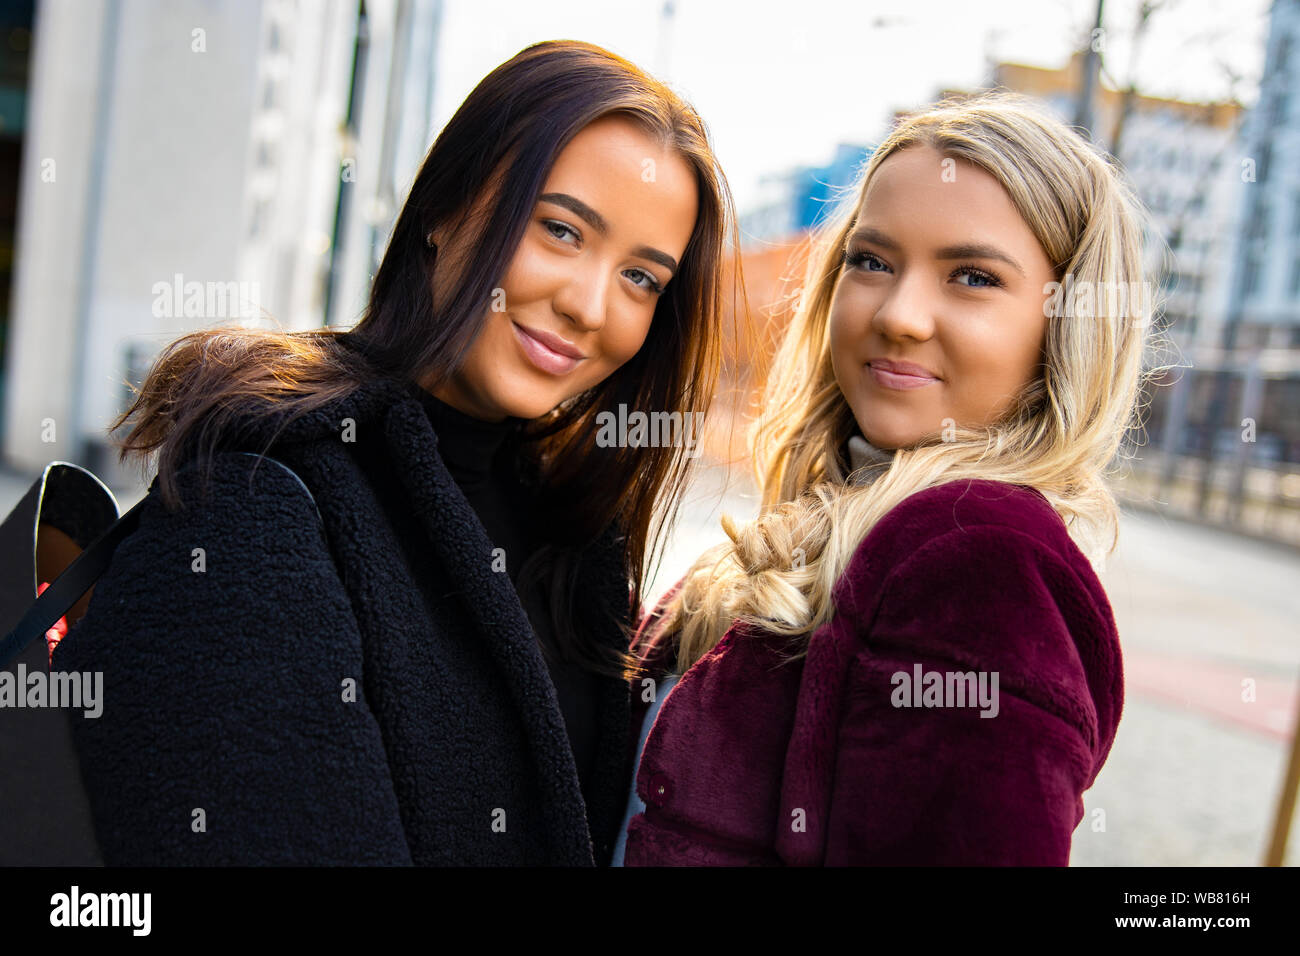 Close-up Portrait Of Cheerful and Beautiful Young Women Friends In City Stock Photo